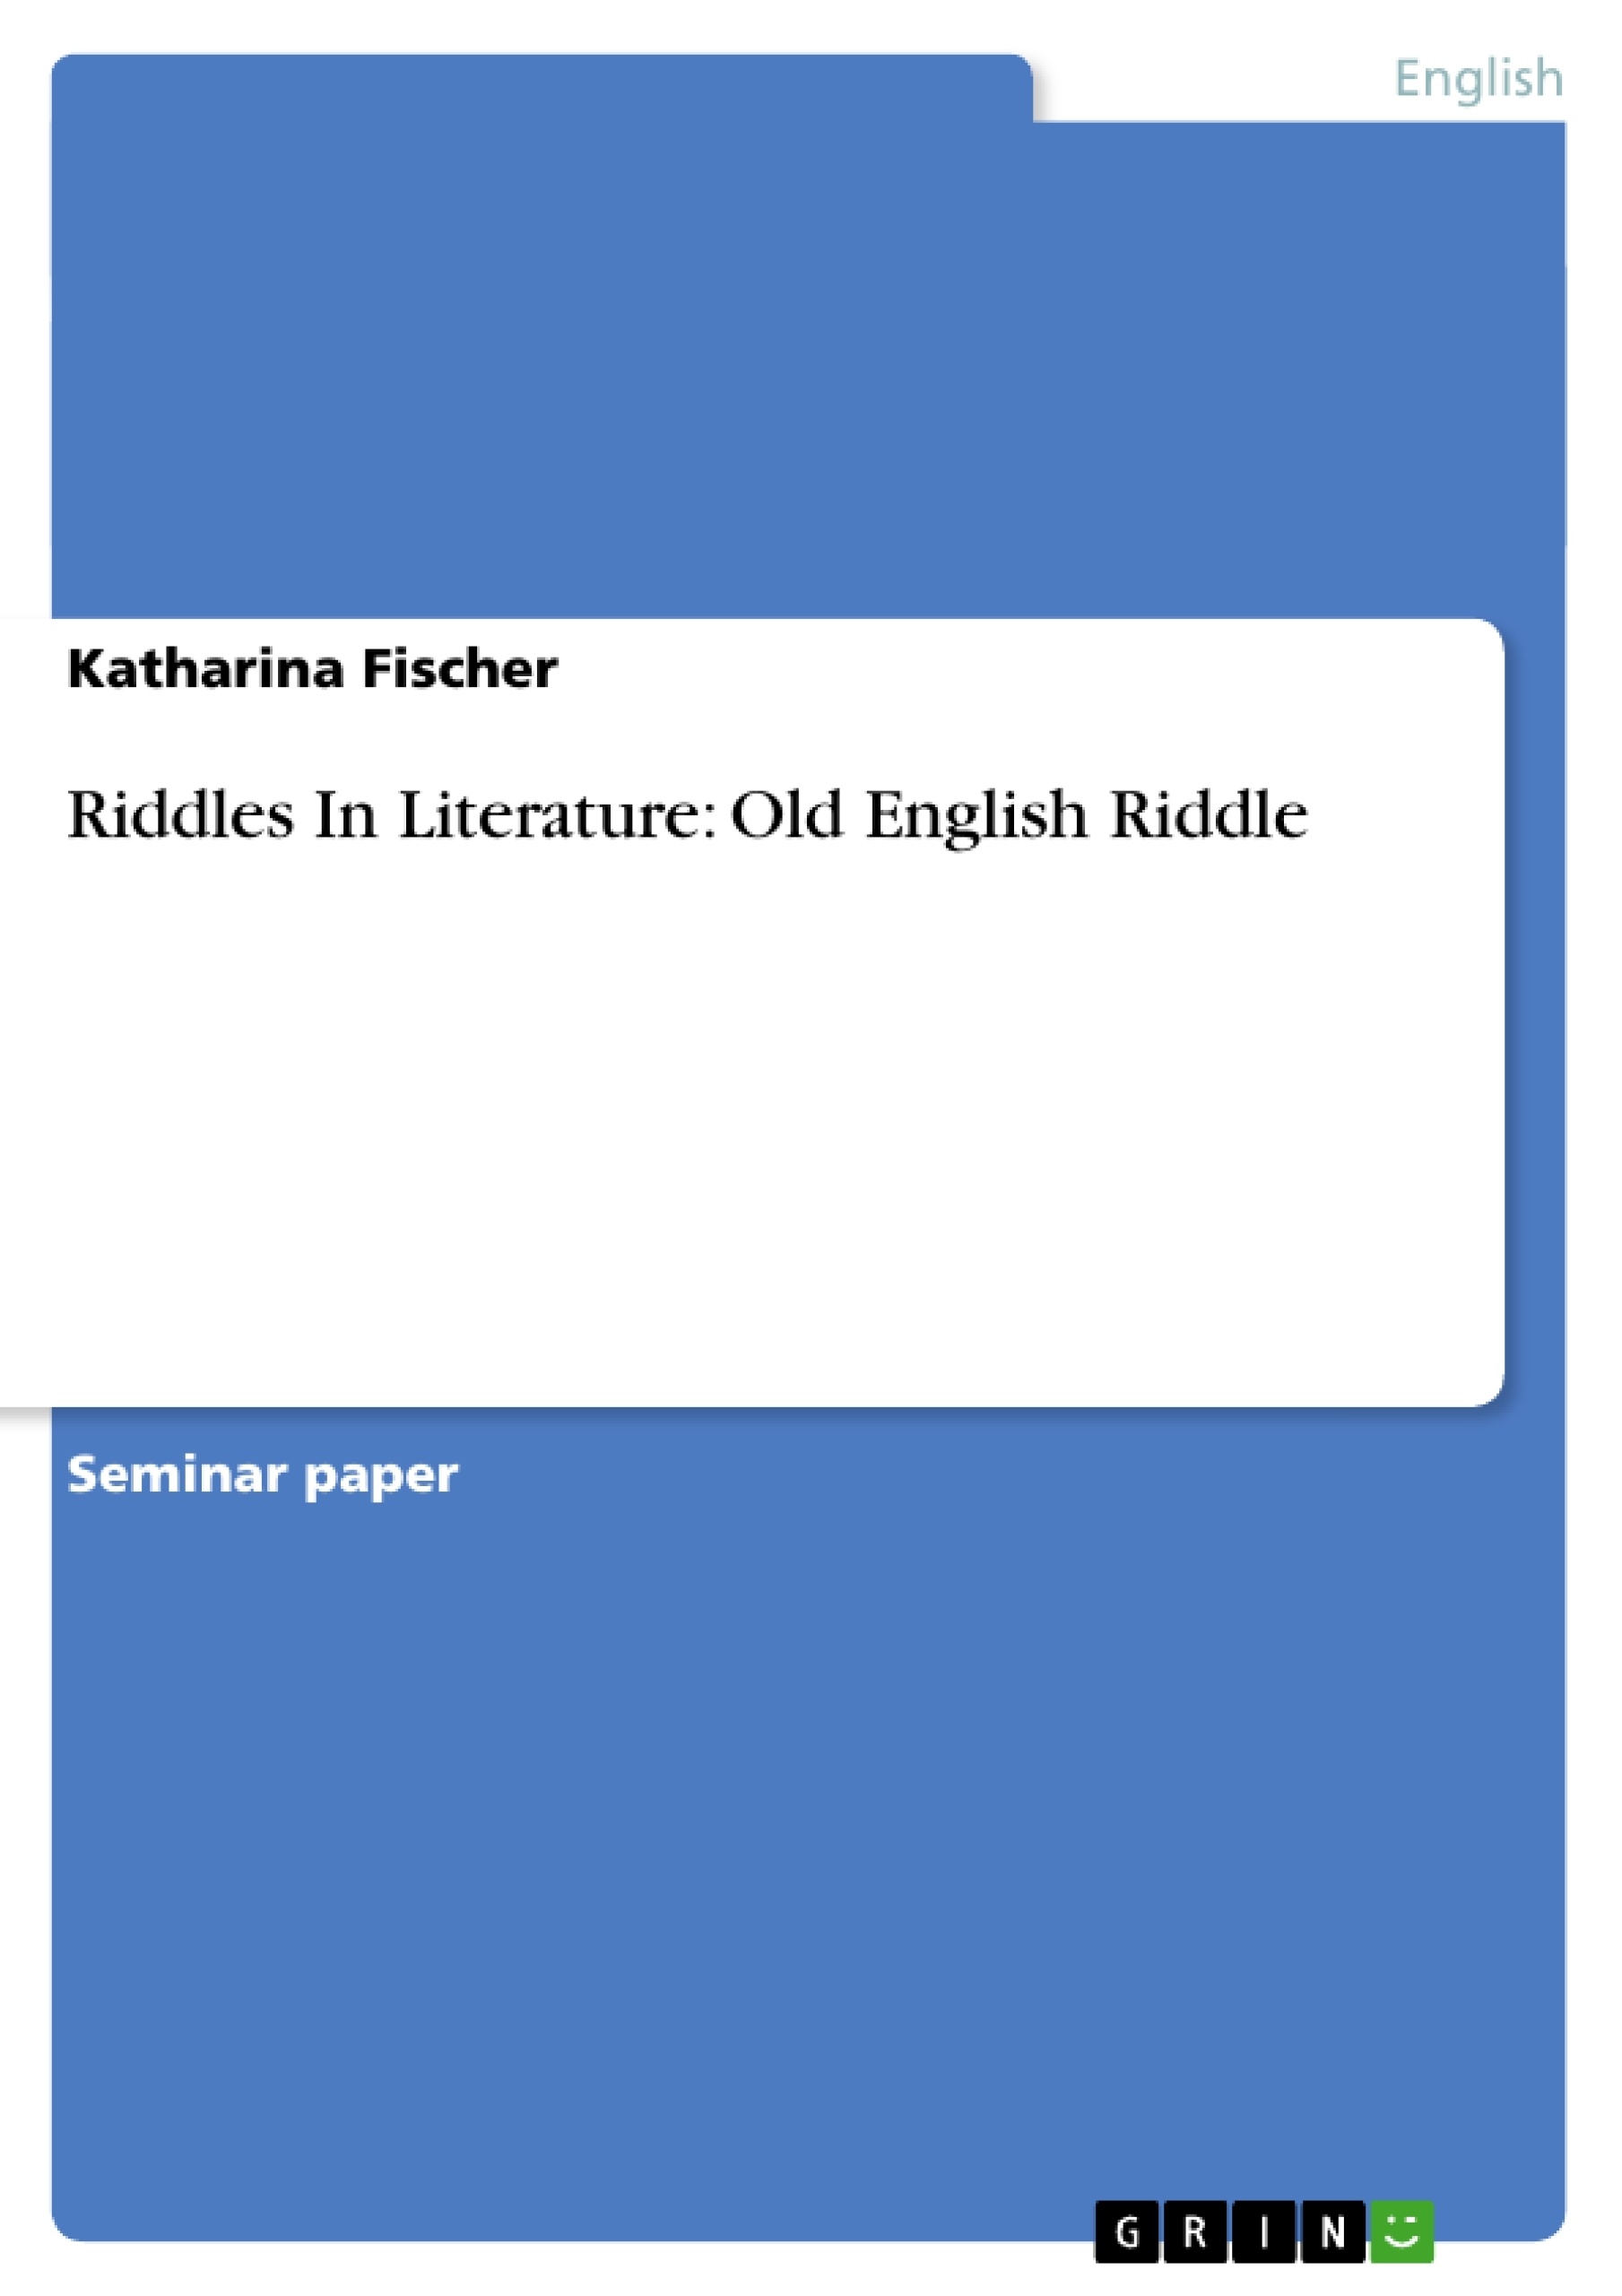 Titre: Riddles In Literature: Old English Riddle